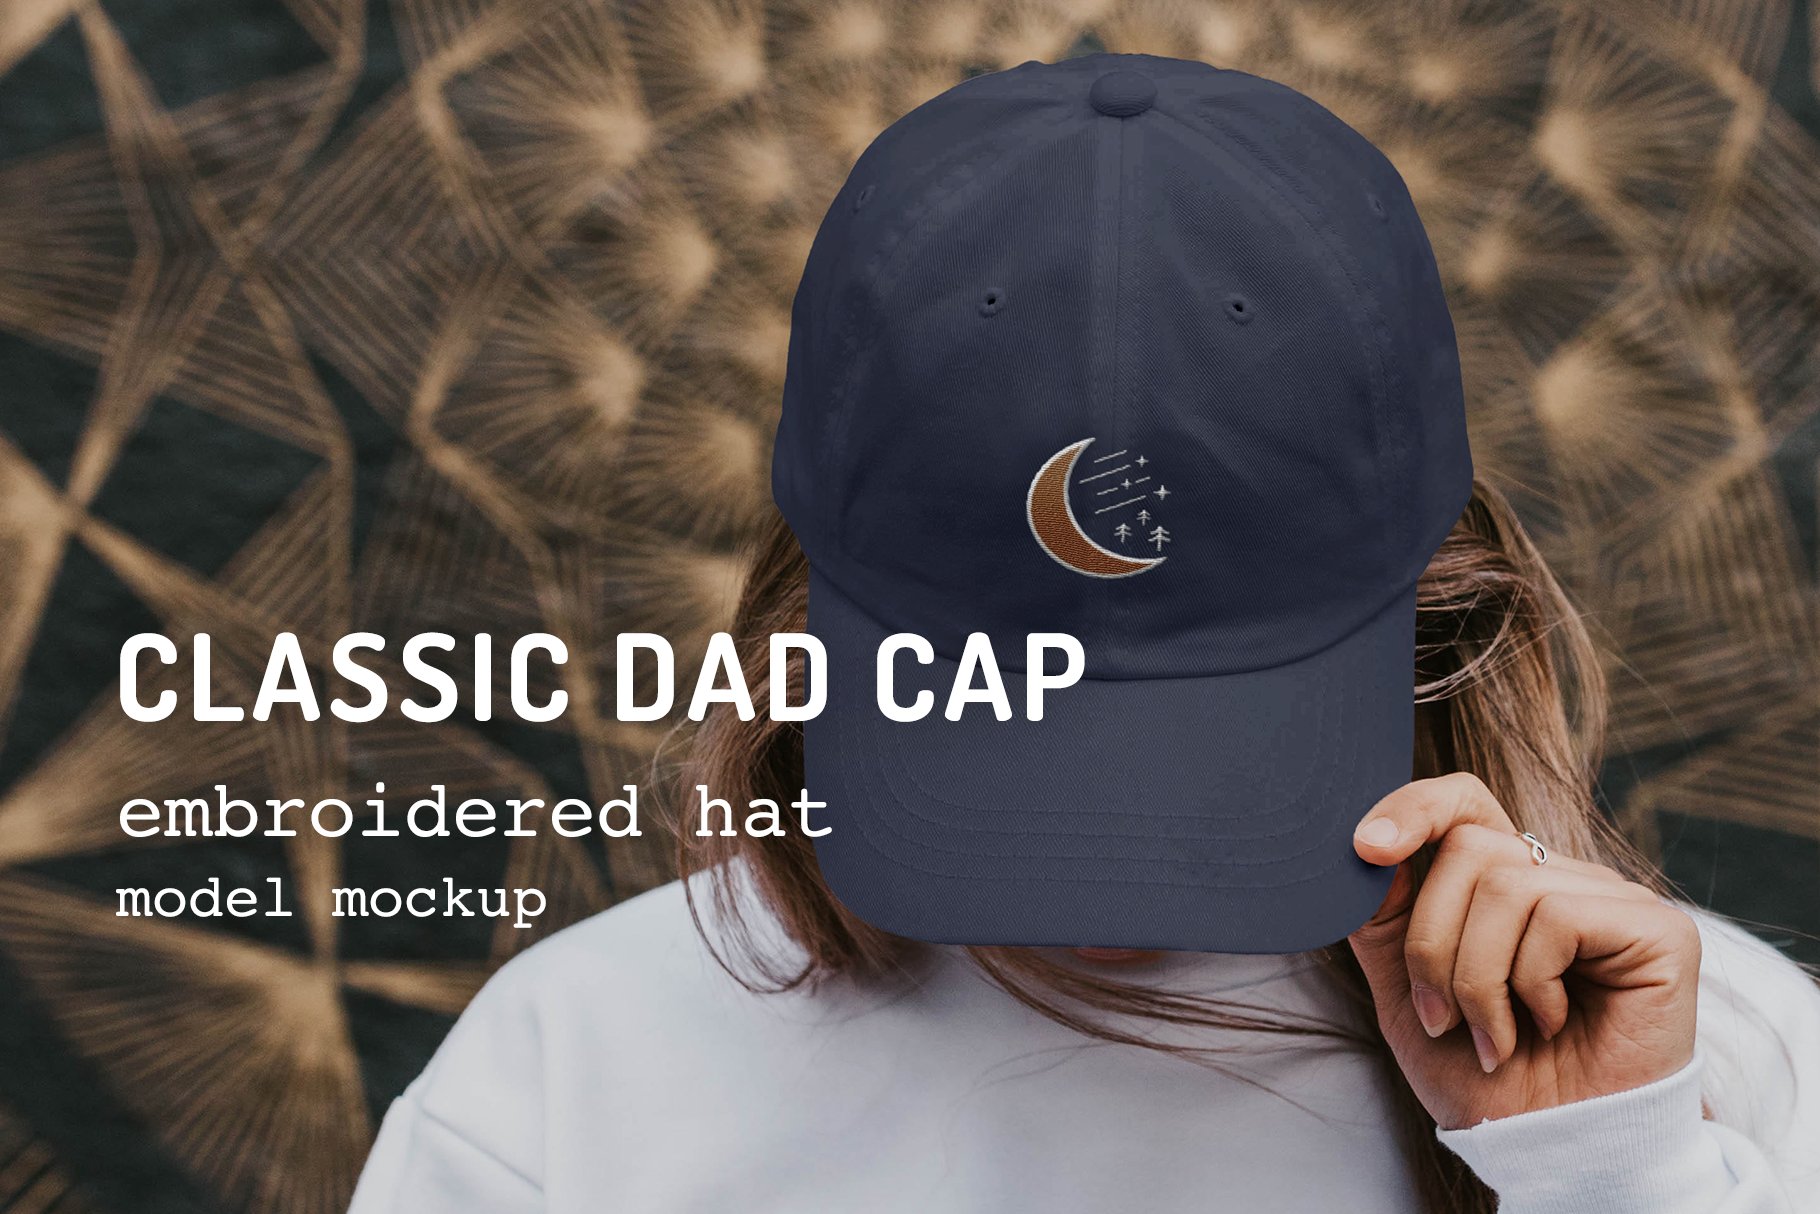 Dad Hat w/ Embroidered Patch Mockup cover image.